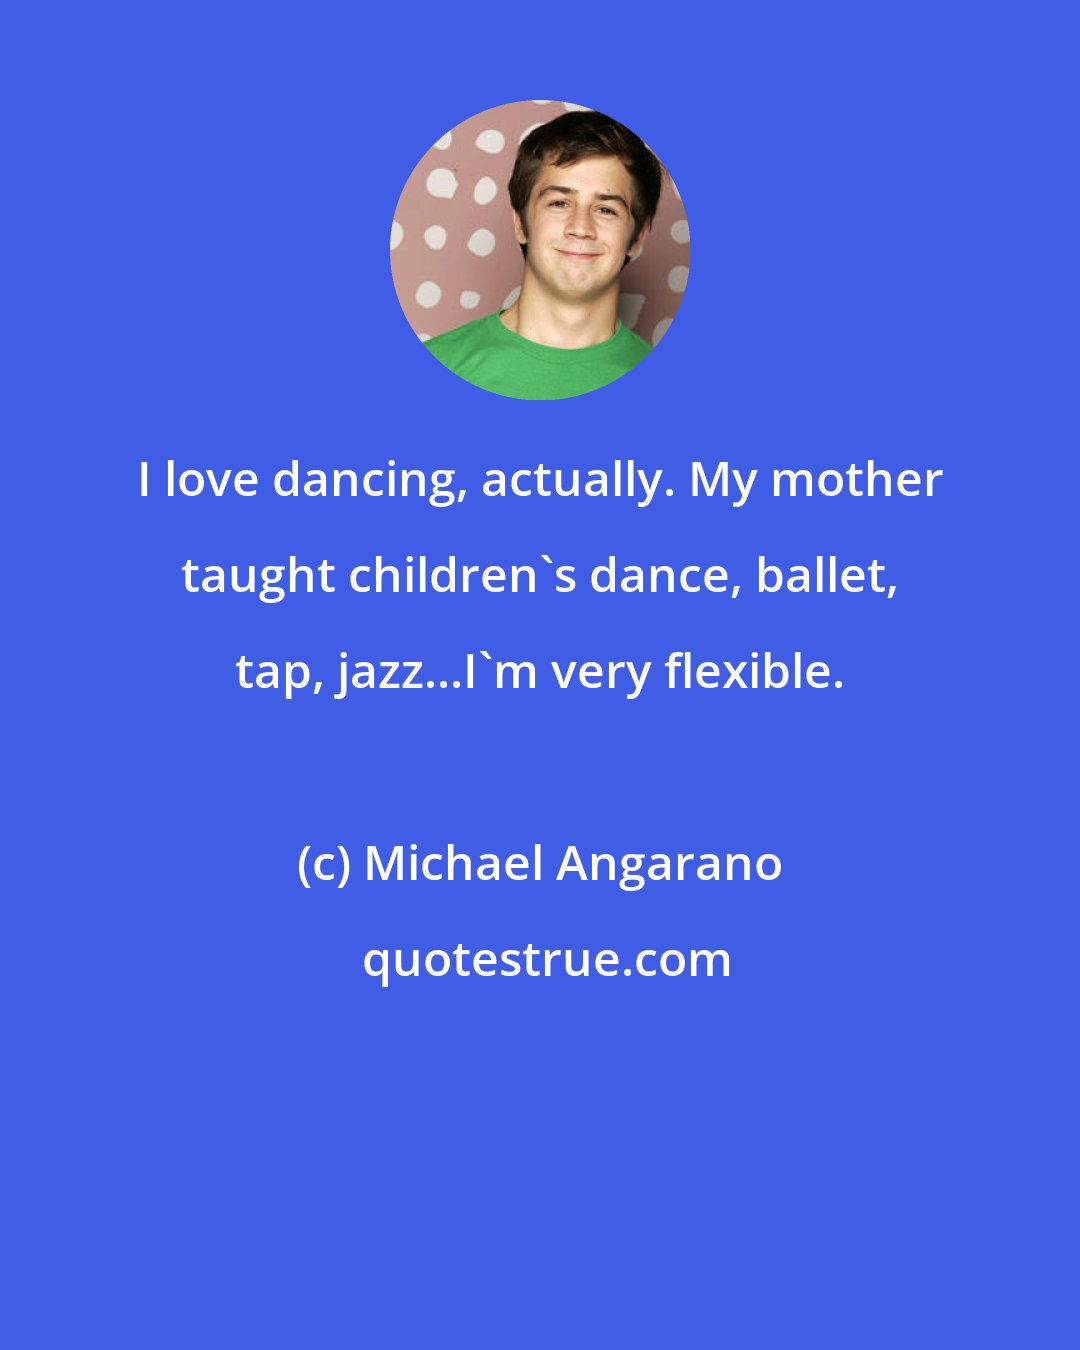 Michael Angarano: I love dancing, actually. My mother taught children's dance, ballet, tap, jazz...I'm very flexible.